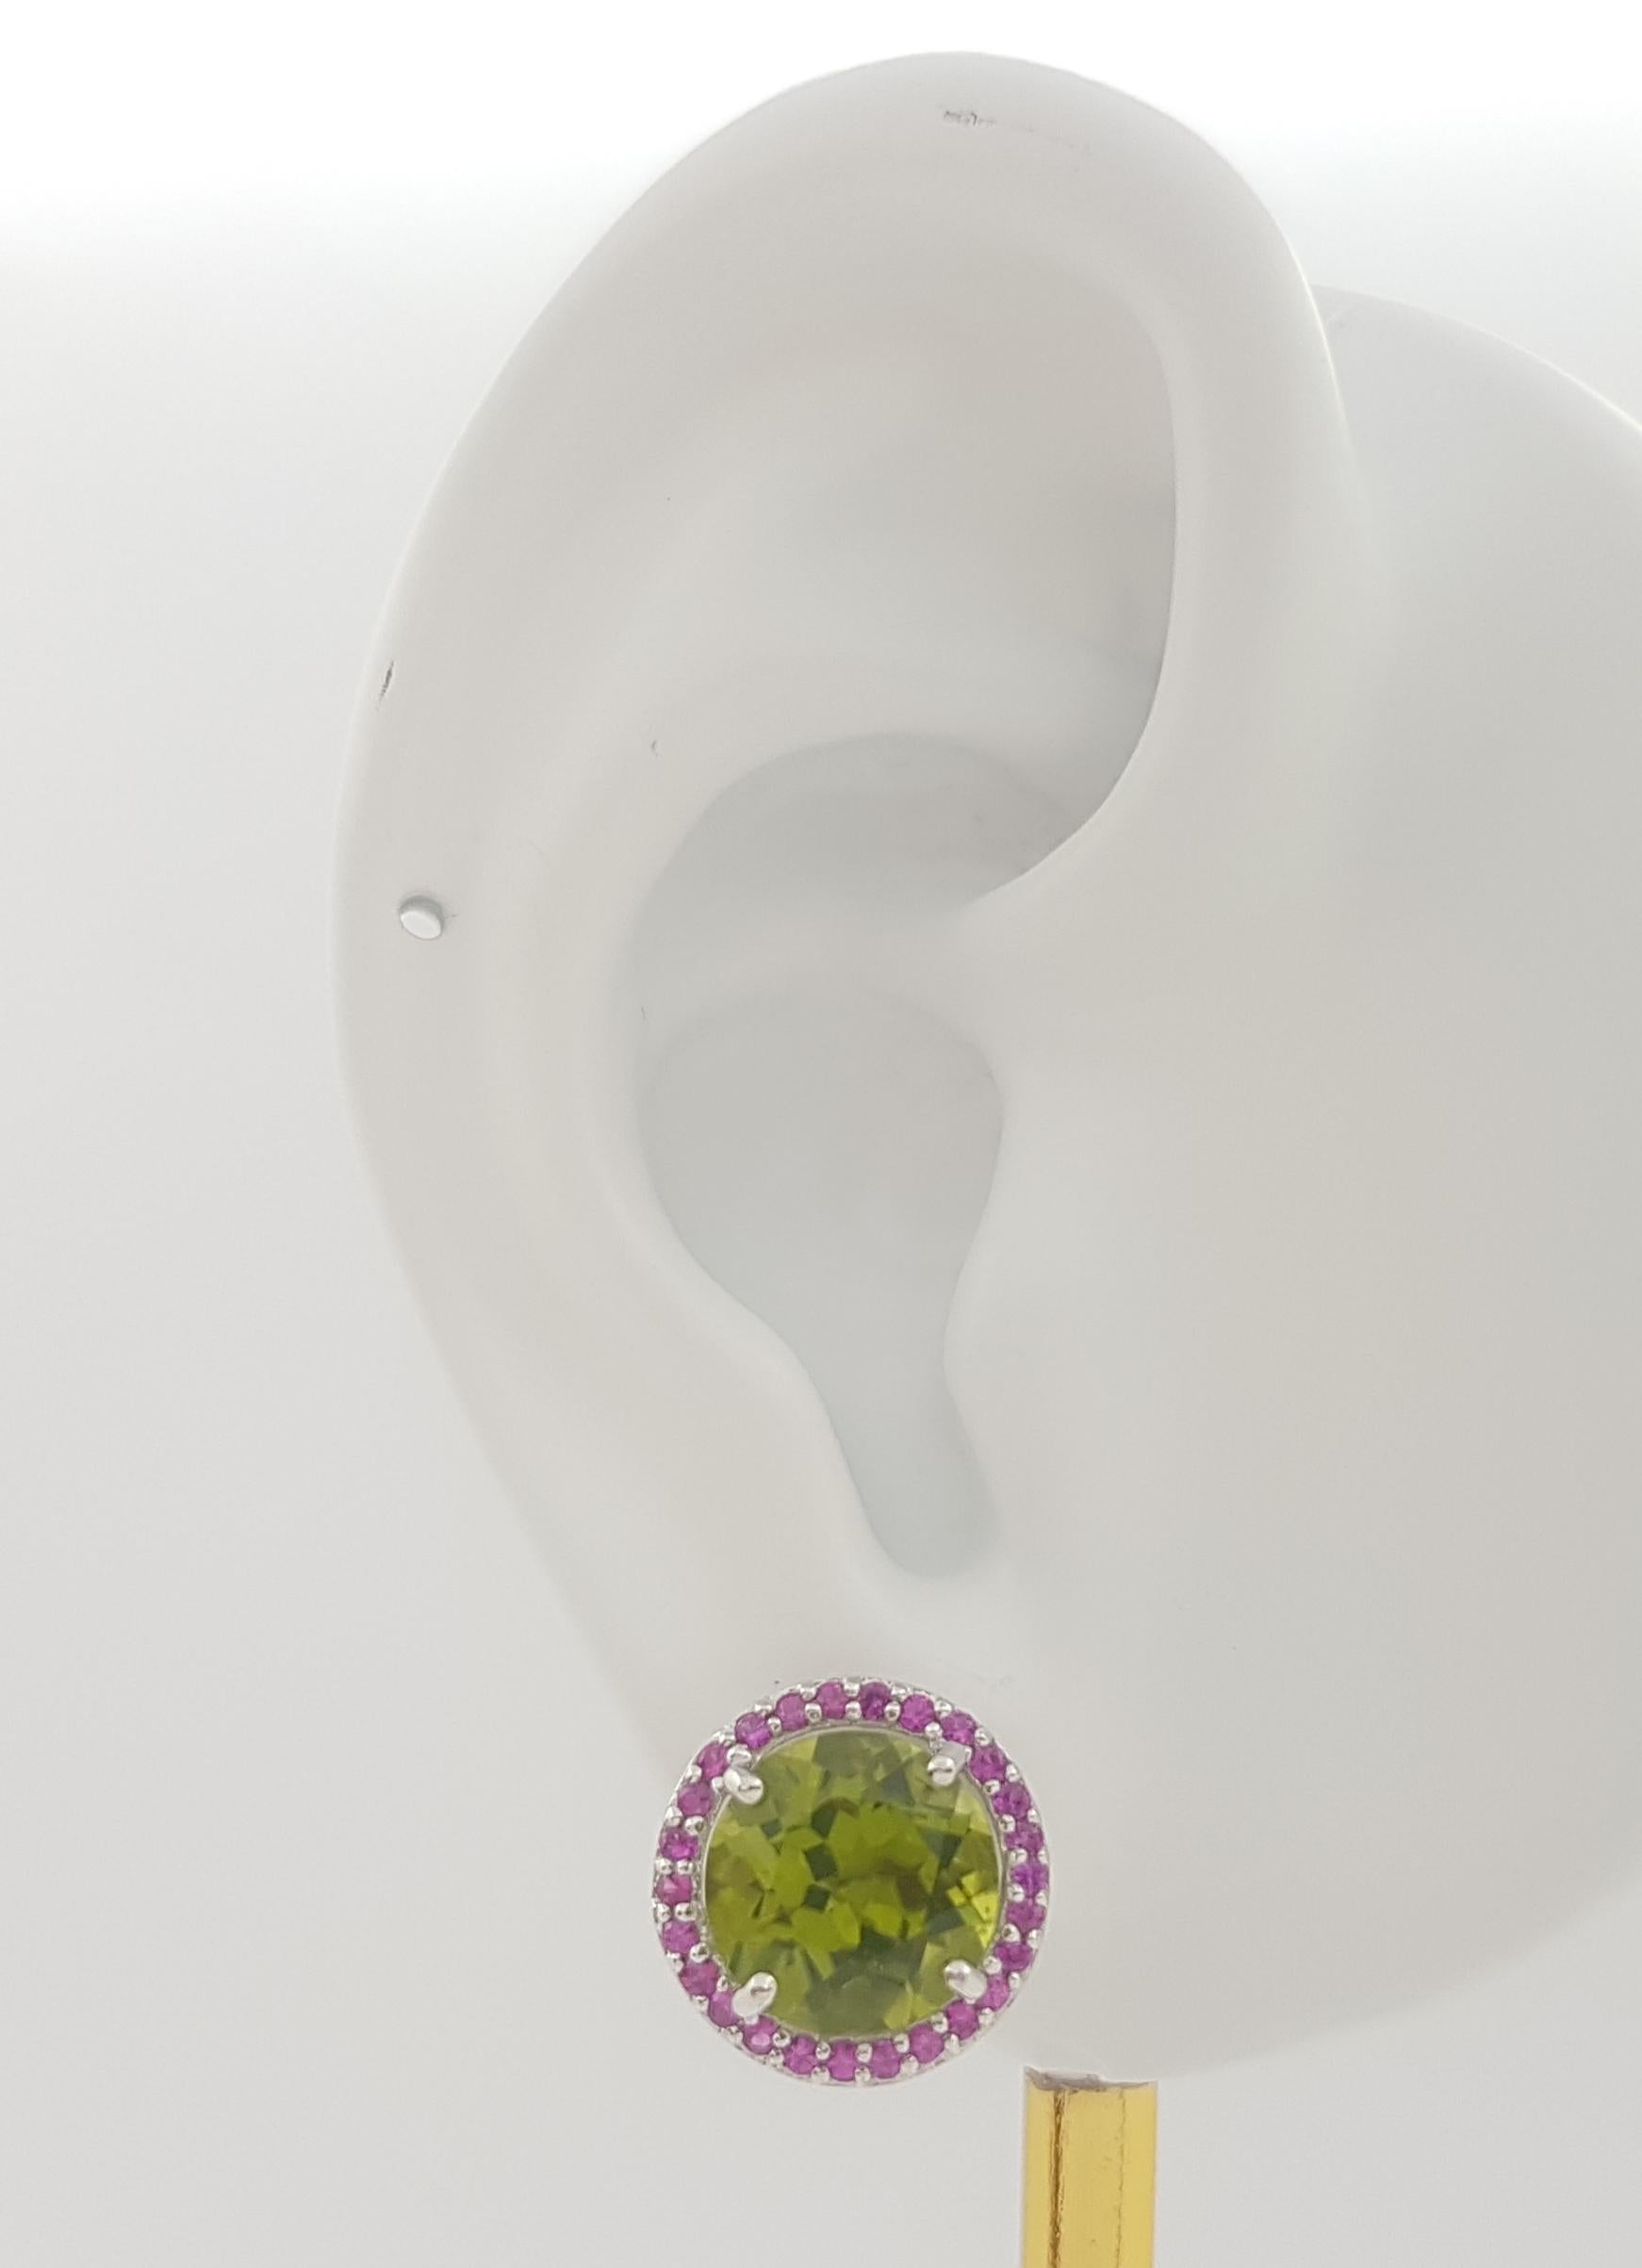 Peridot 5.93 carats with Pink Sapphire 0.43 carat Earrings set in 18K White Gold Settings

Width: 1.2 cm 
Length: 1.2 cm
Total Weight: 5.22 grams

